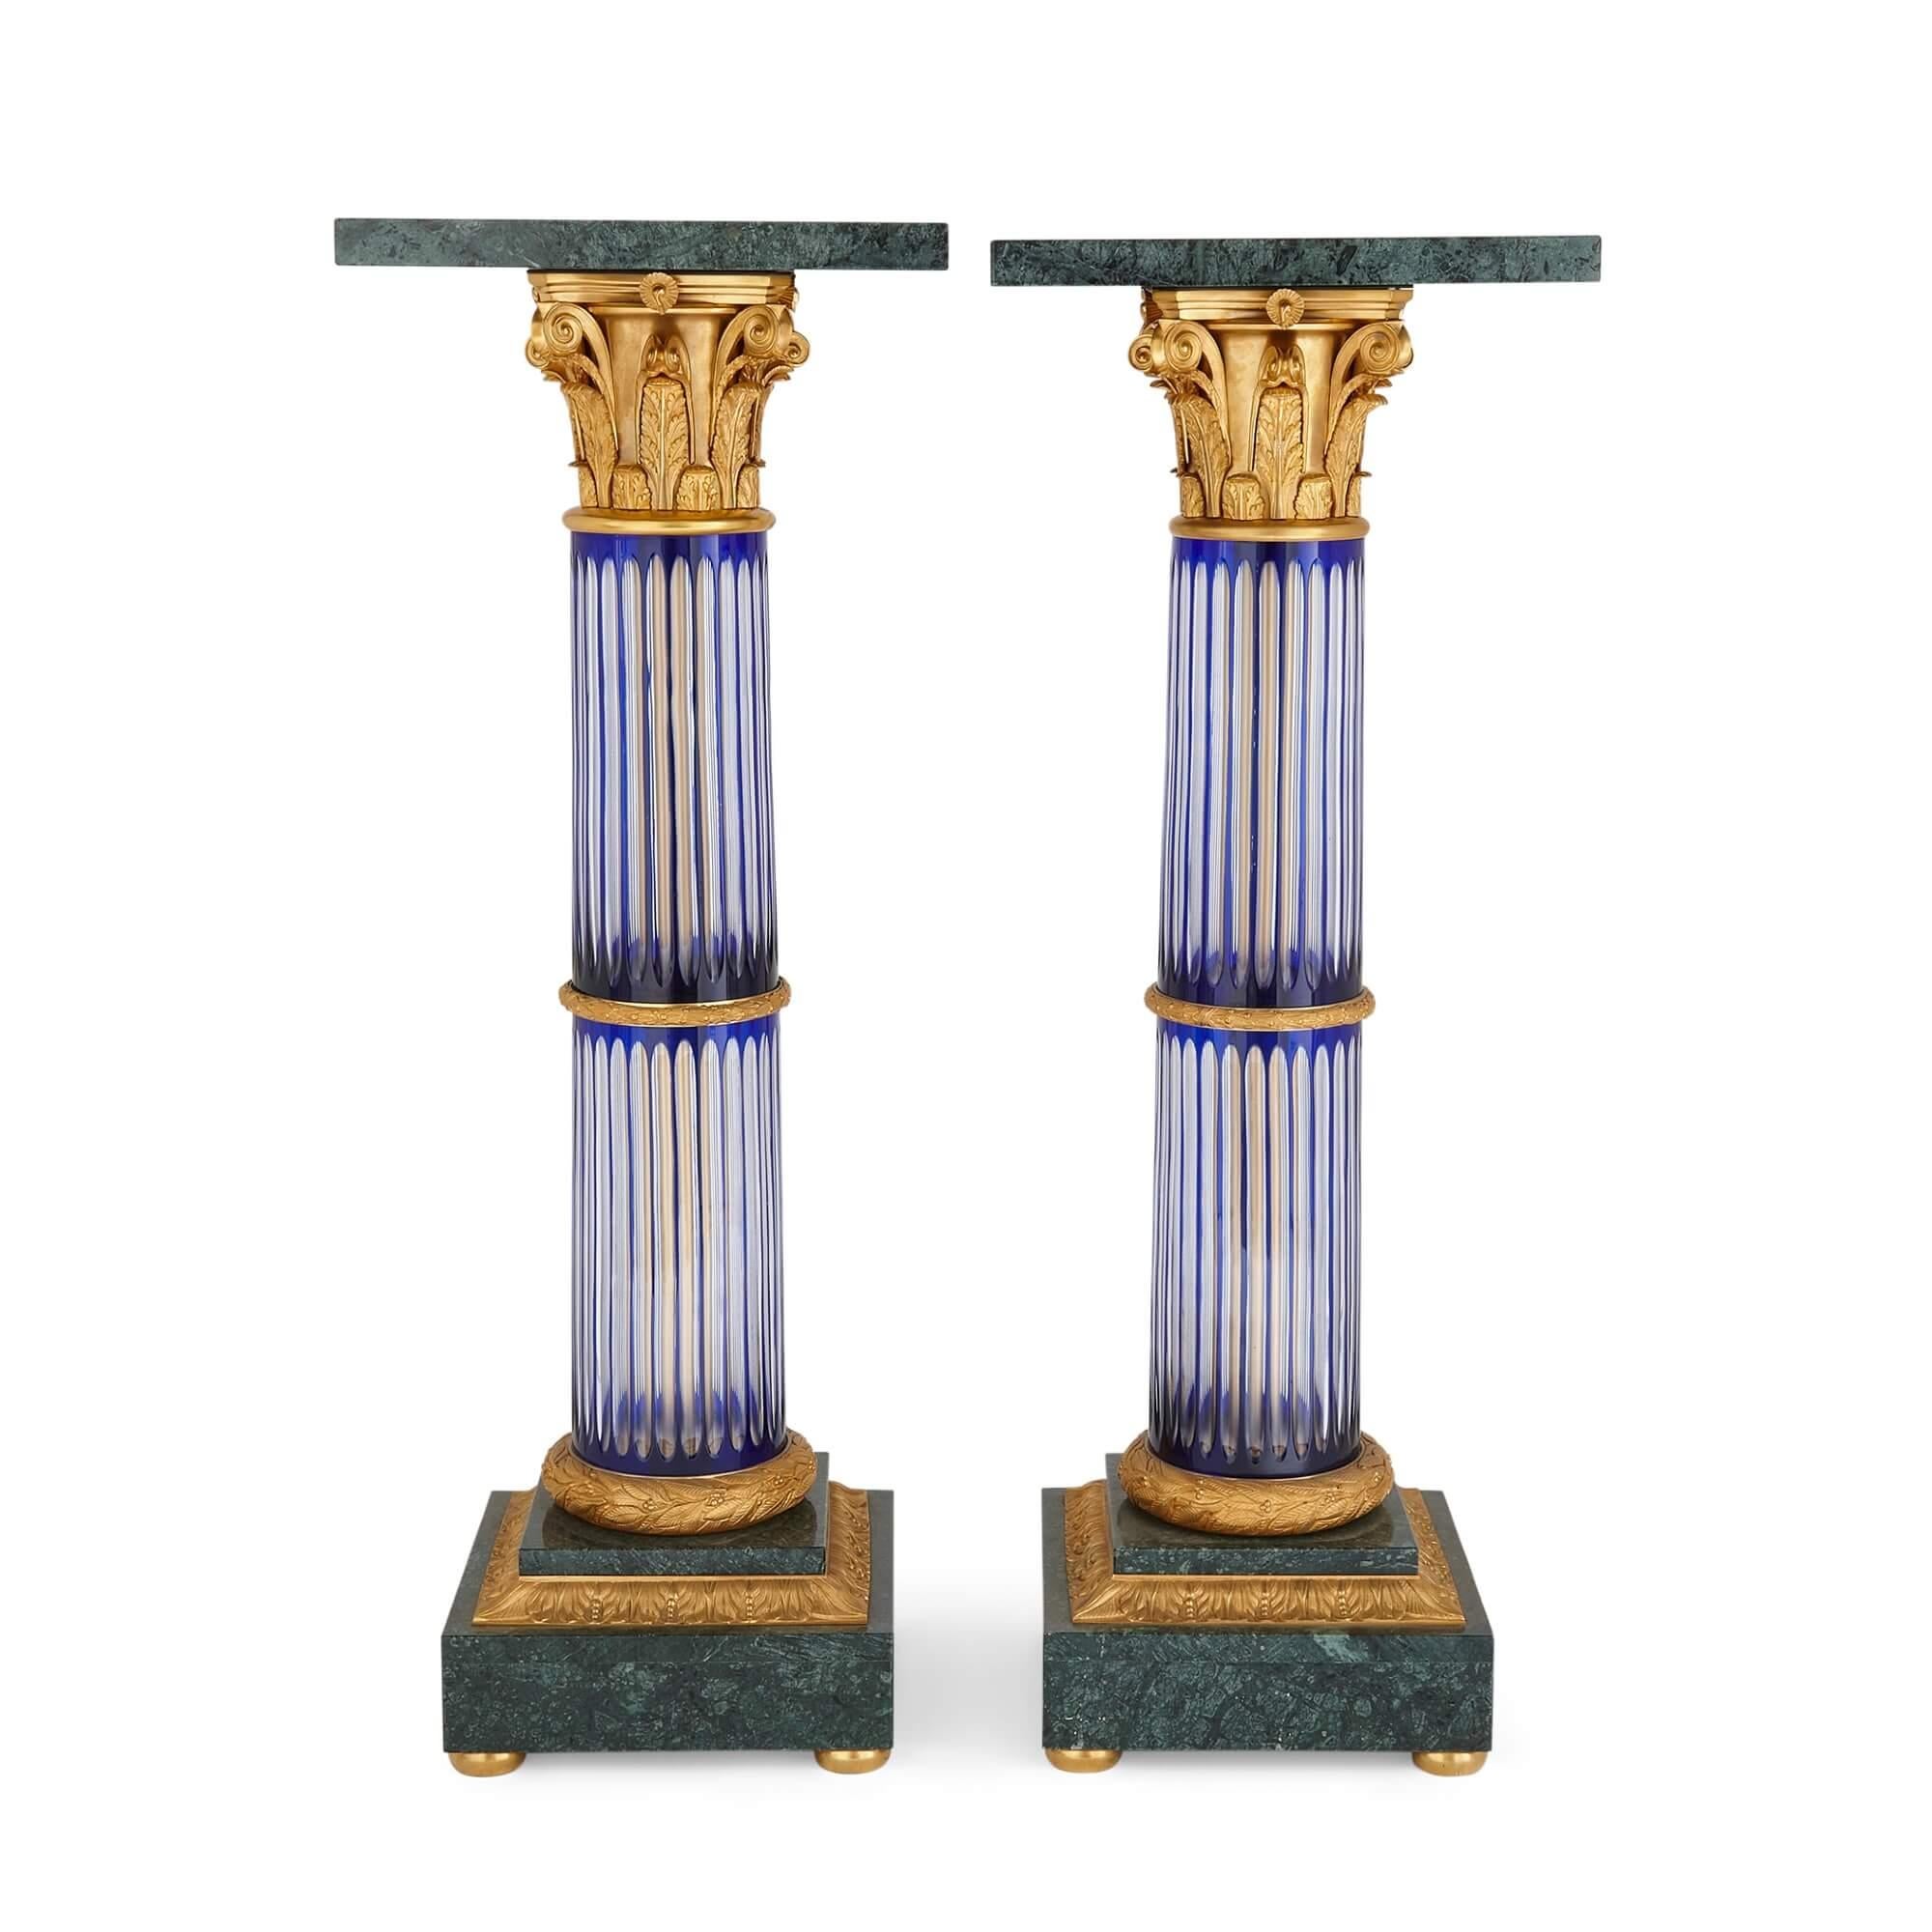 Pair of large Neoclassical style glass, marble and ormolu pedestals
French, 20th century 
Height 114cm, diameter 42cm

This pair of Neoclassical style pedestals have been crafted from marble, ormolu, and coloured glass. 

Green, richly veined